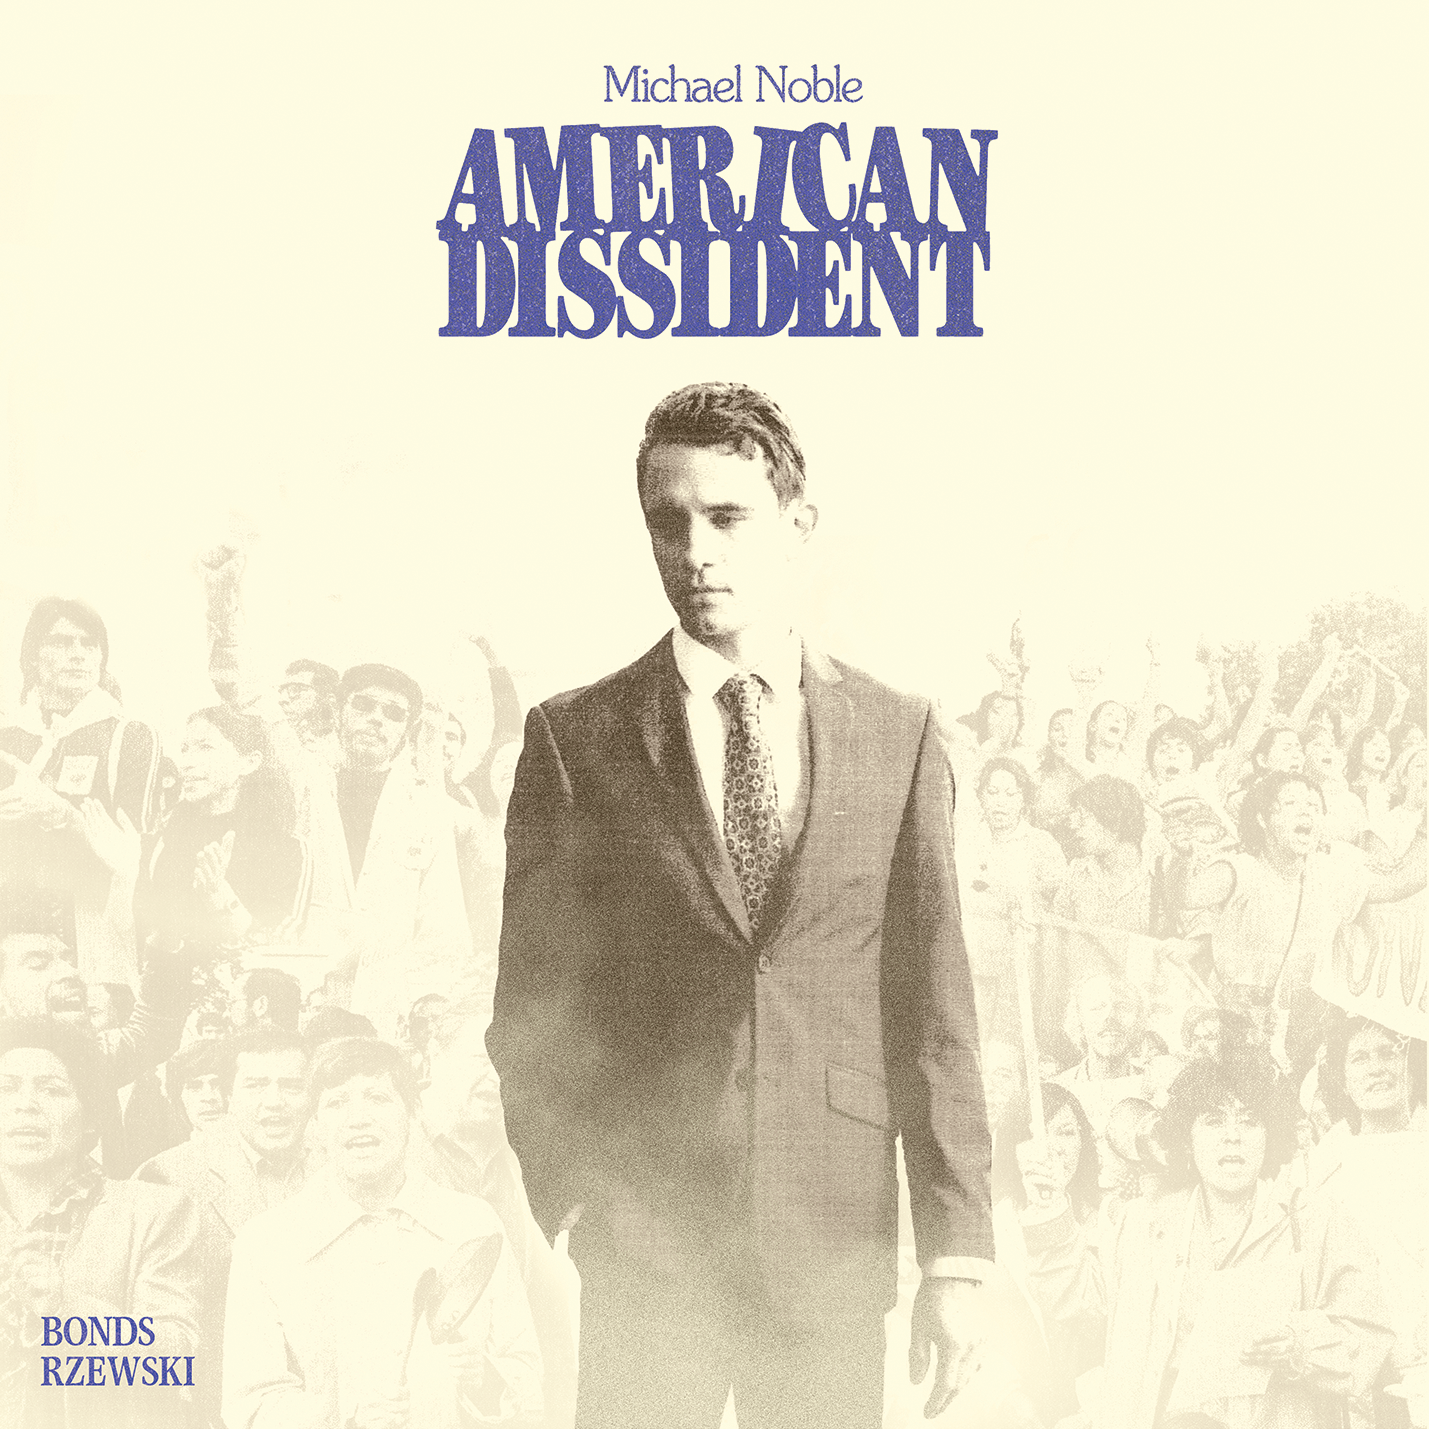 Noble's American Dissident